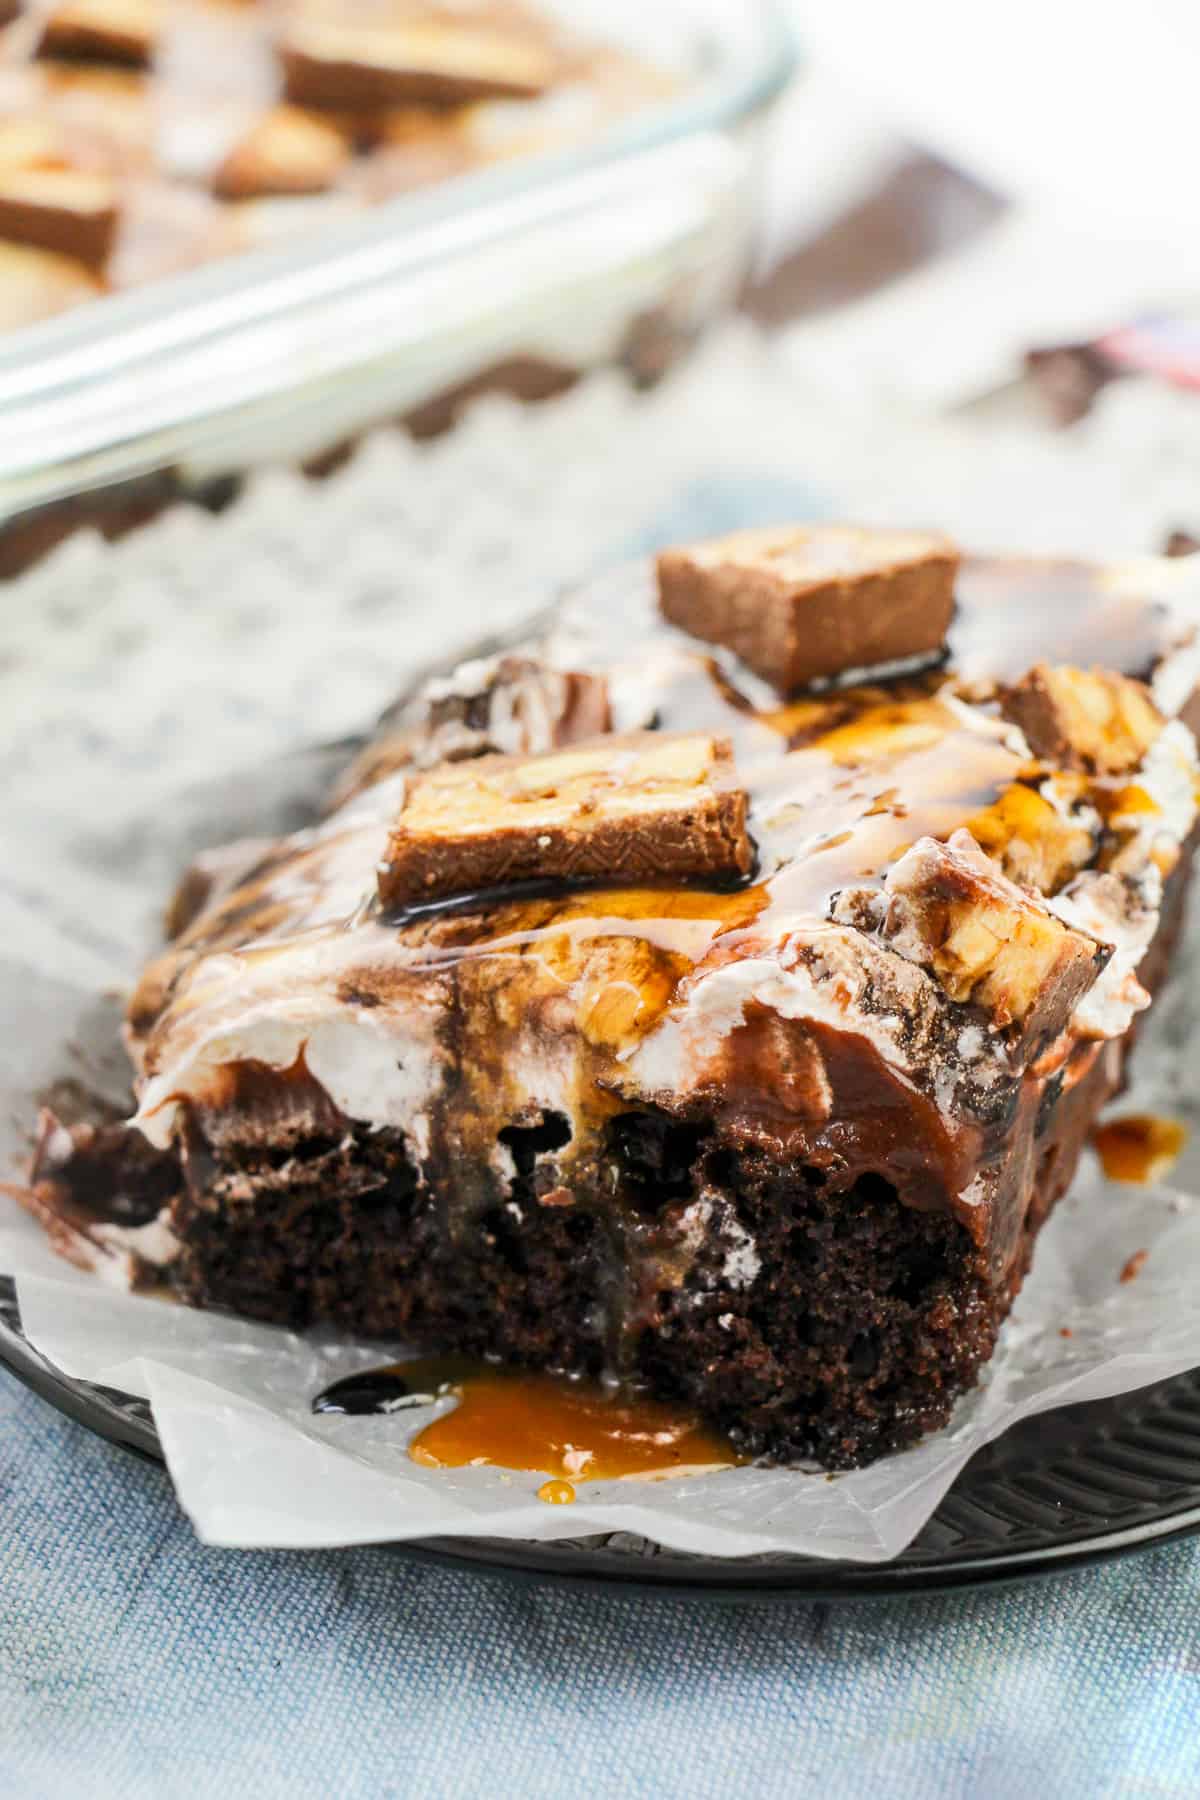 Chocolate snickers poke cake dripping with chocolate and caramel sauces.